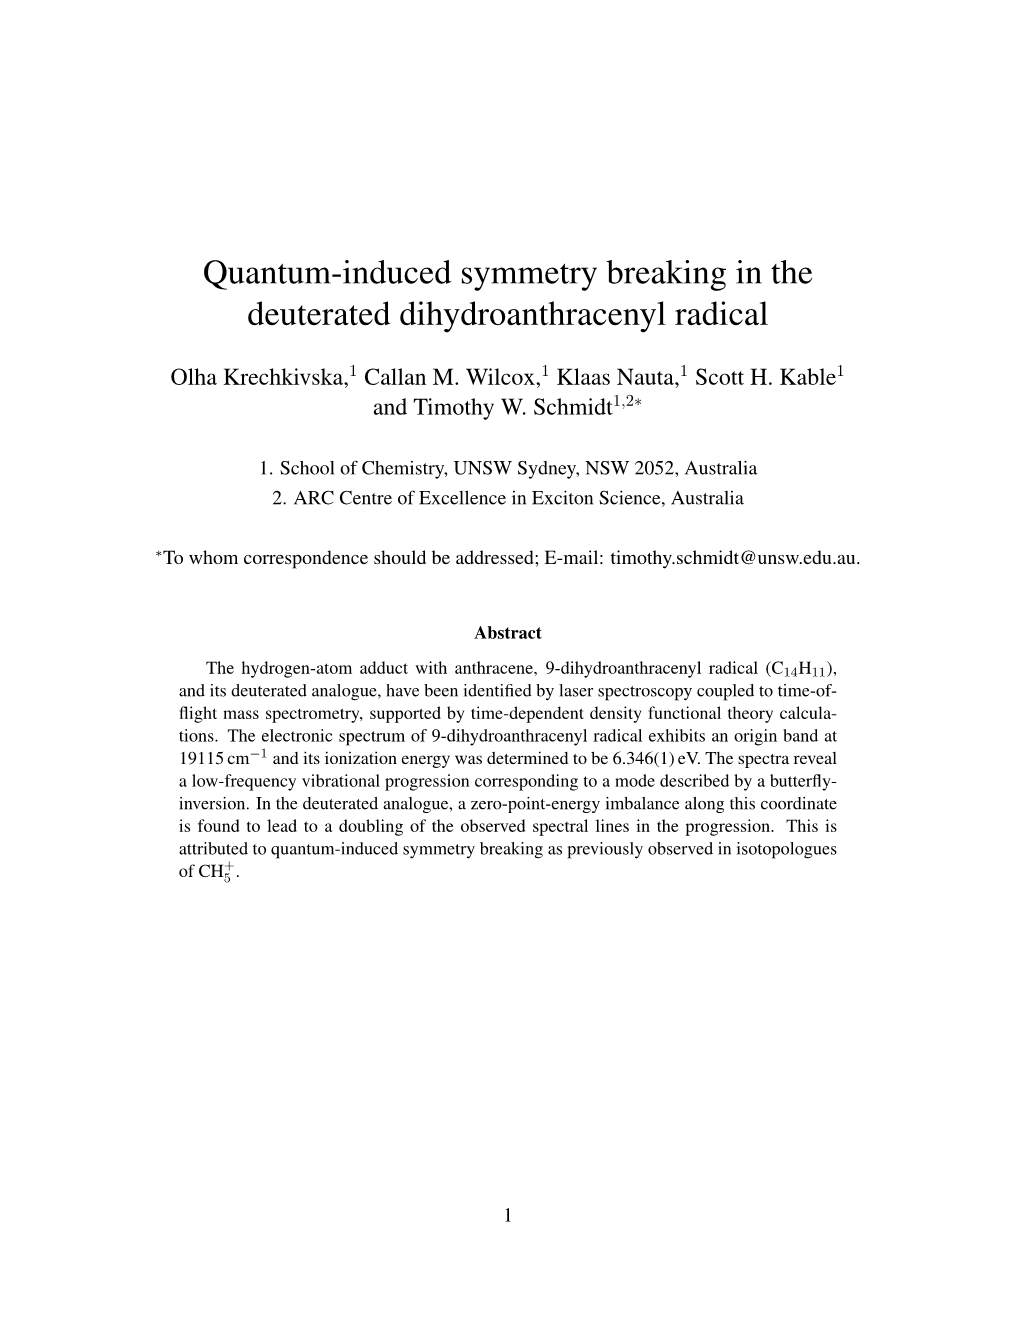 Quantum-Induced Symmetry Breaking in the Deuterated Dihydroanthracenyl Radical